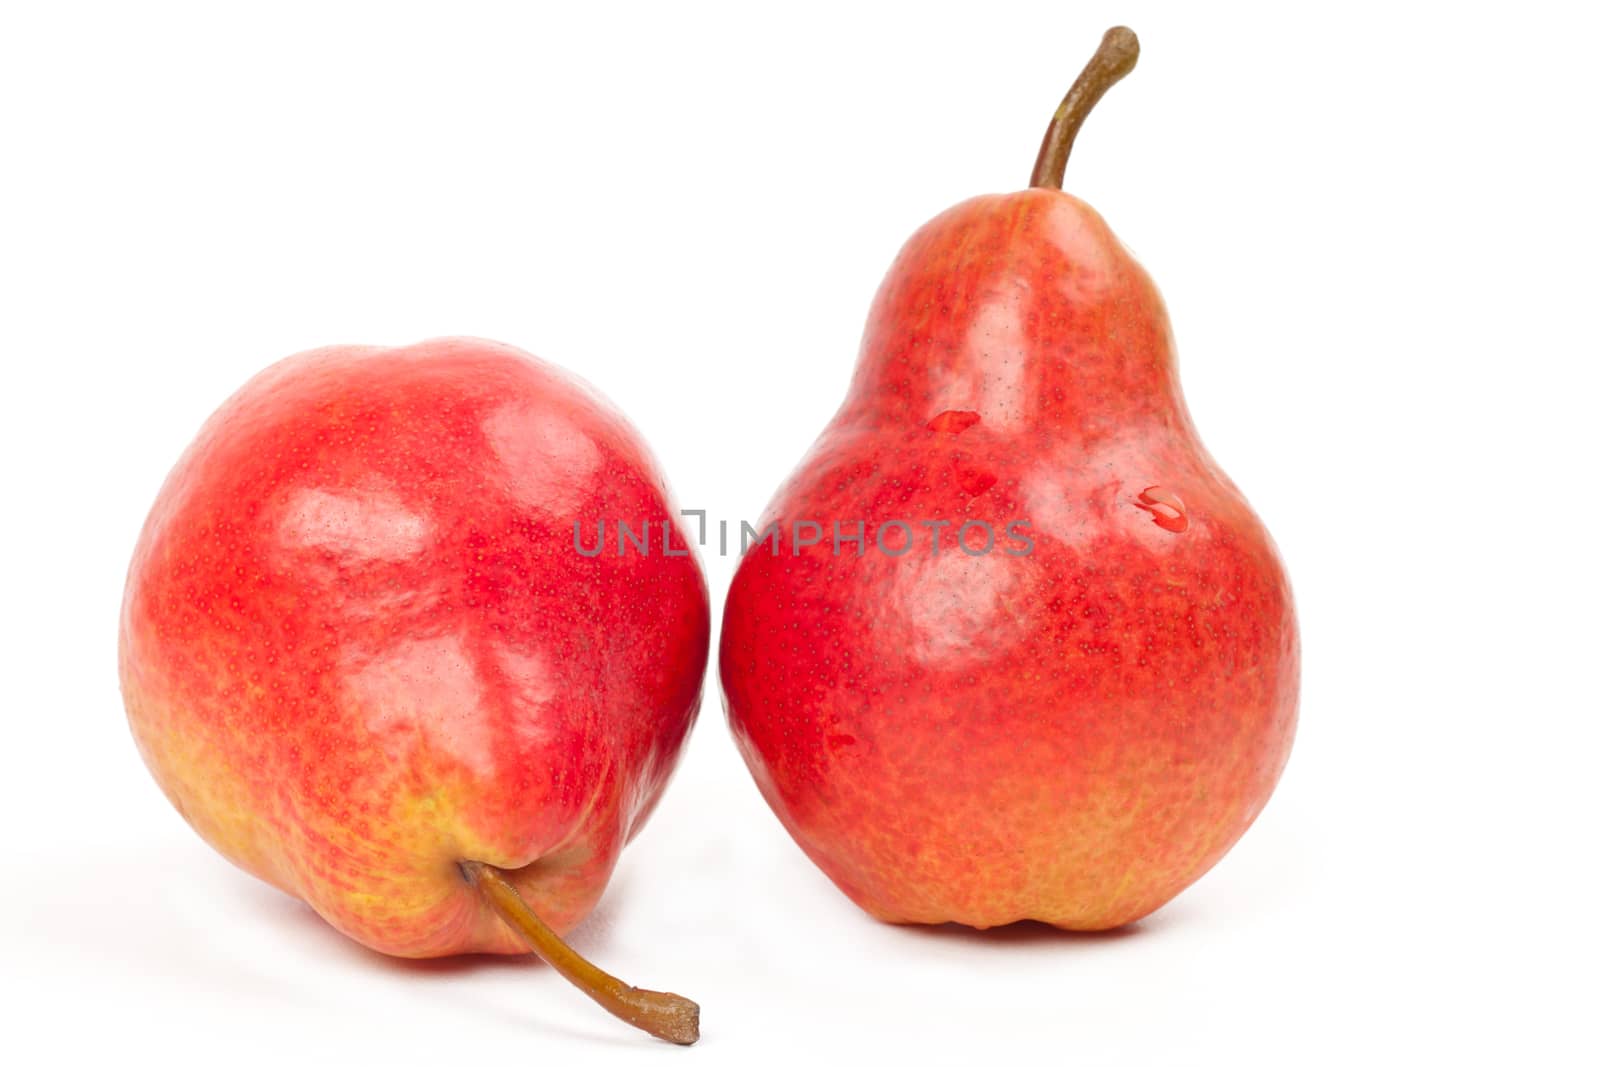 two red pears on white background